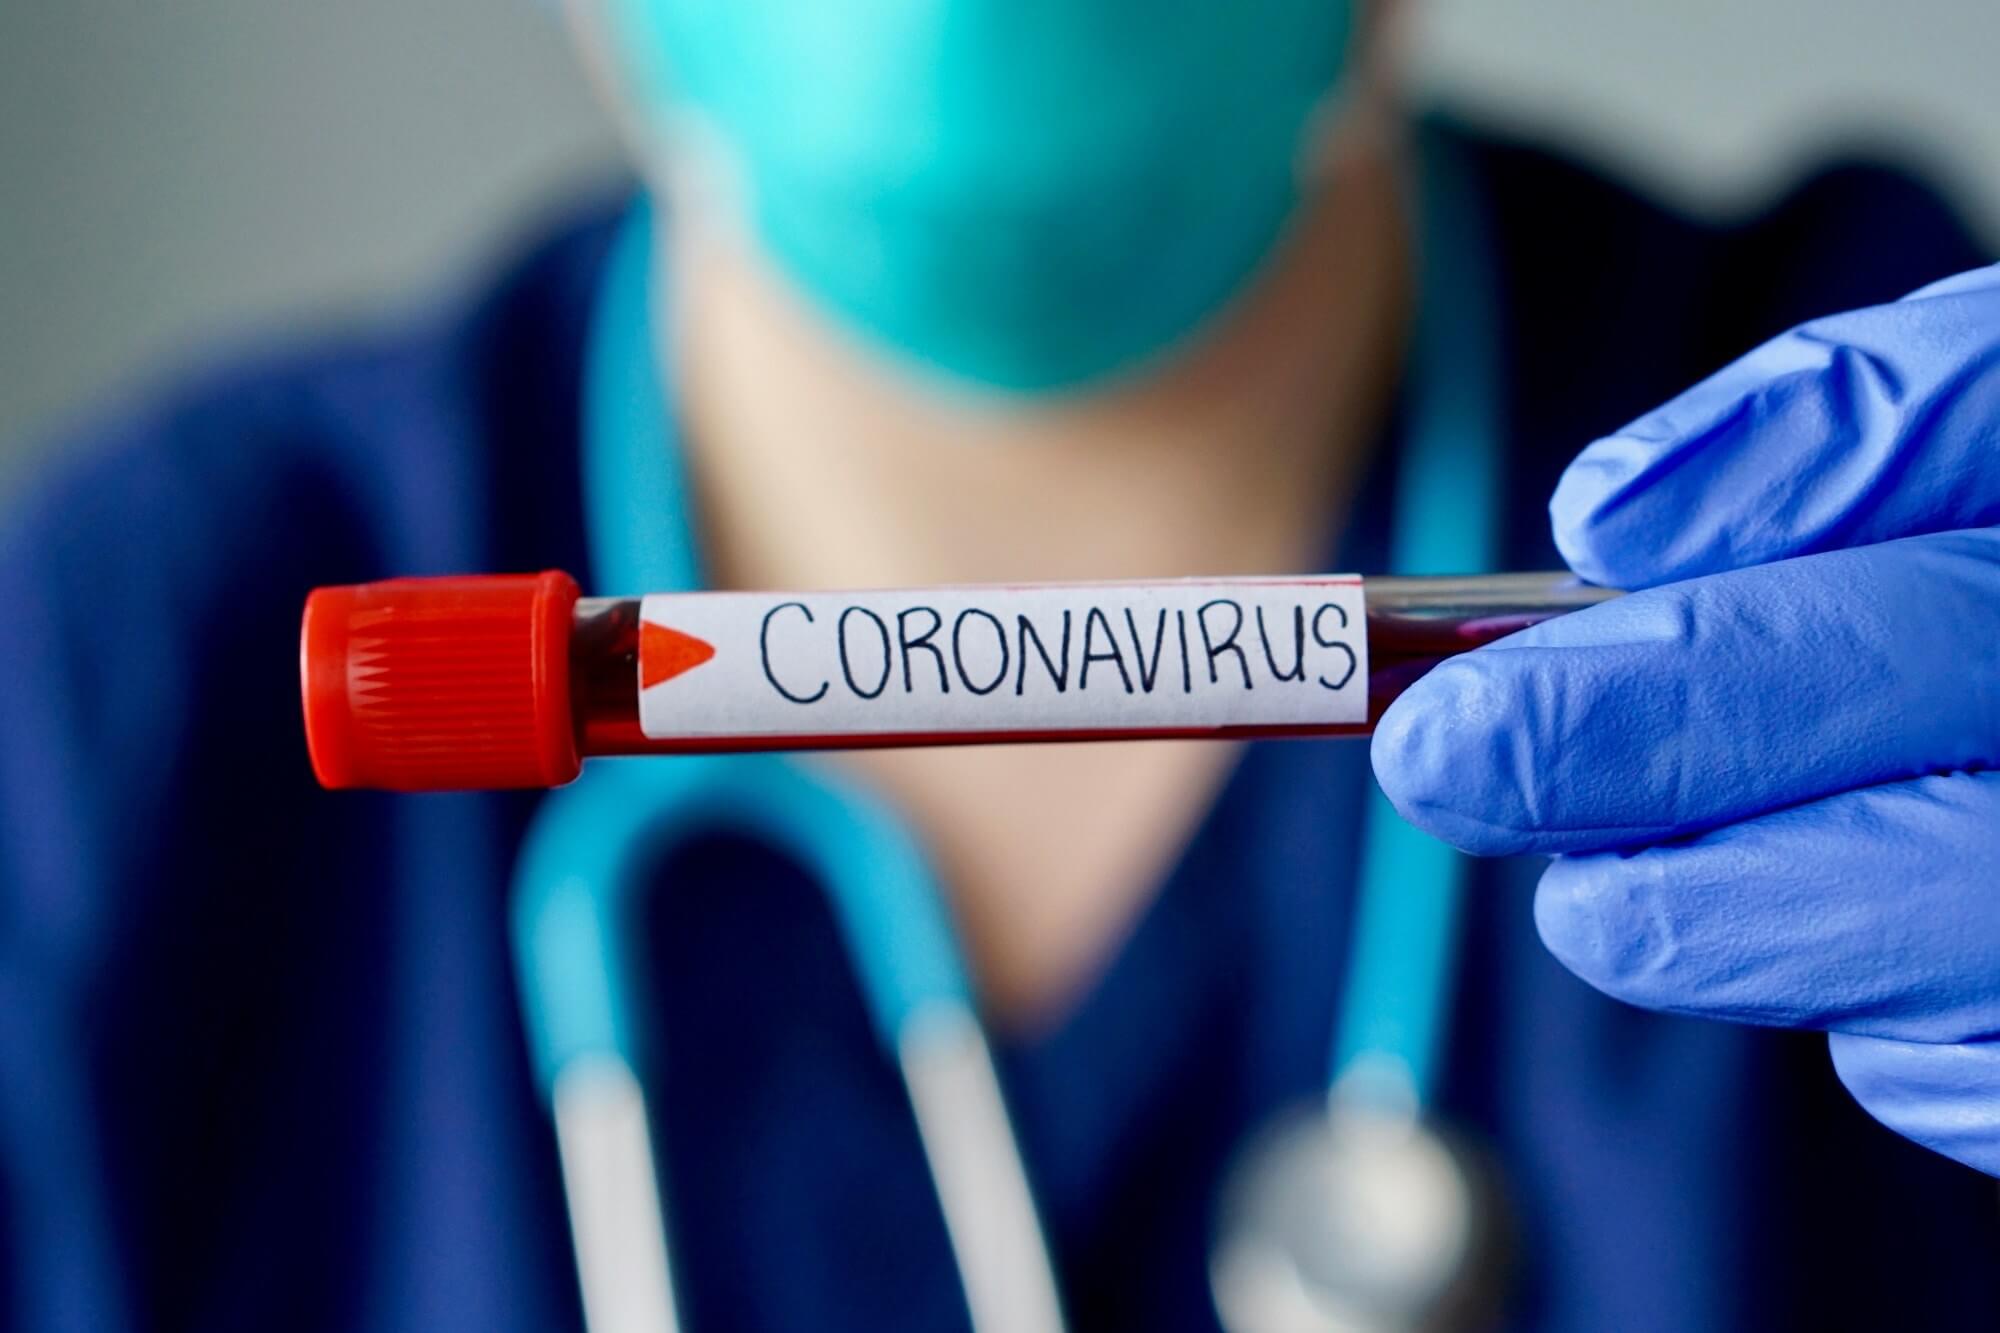 Alibaba develops AI that can identify coronavirus infections with 96% accuracy